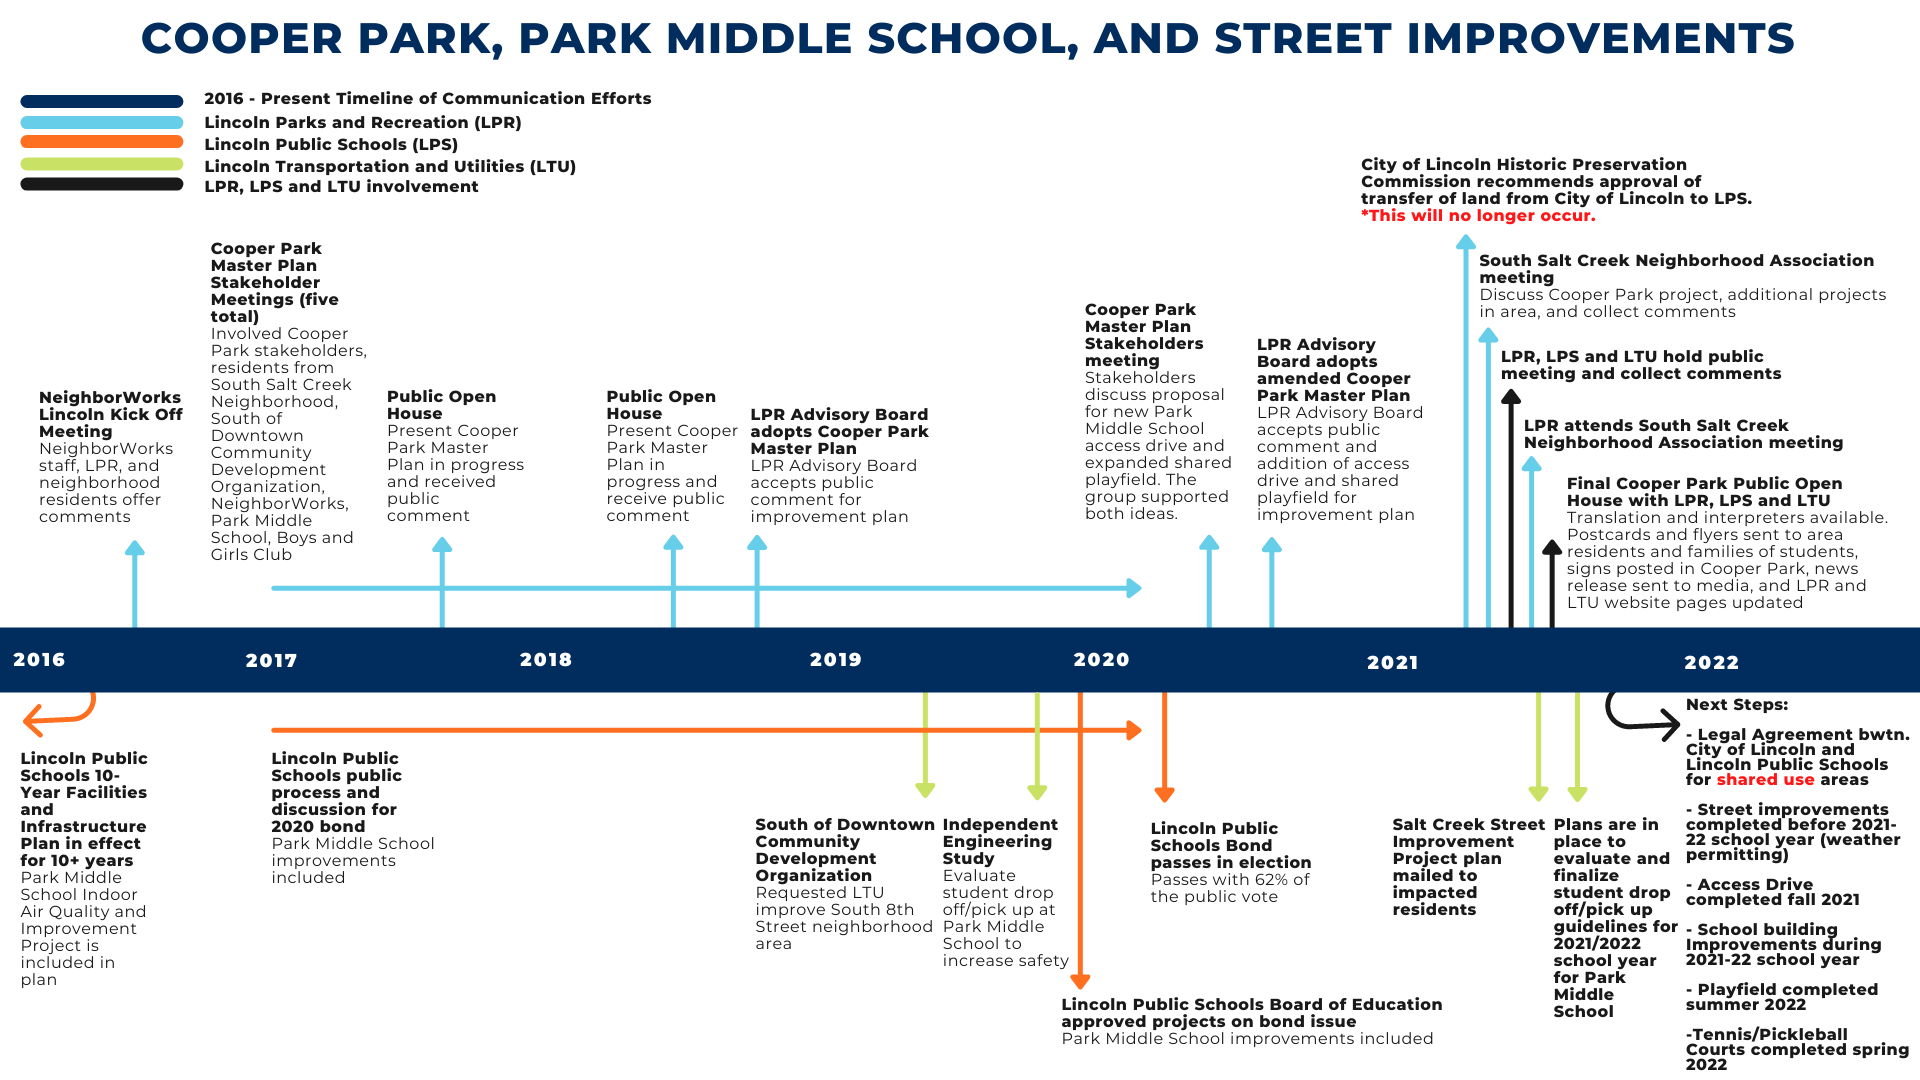 Timeline_SouthSaltCreekProjects.png